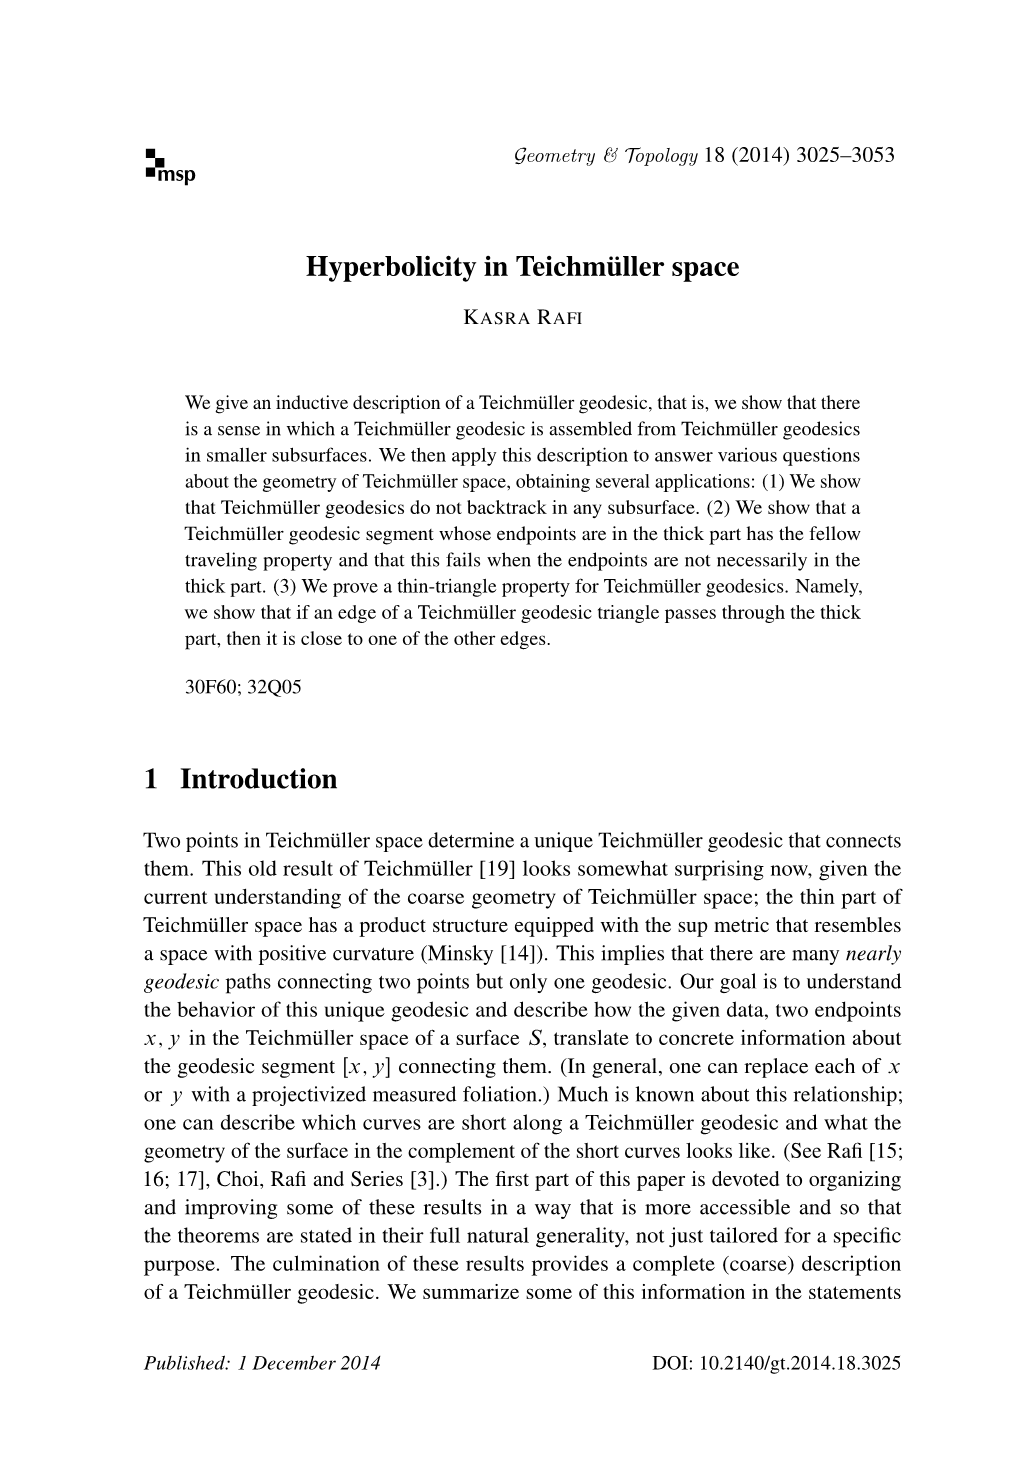 Hyperbolicity in Teichmüller Space